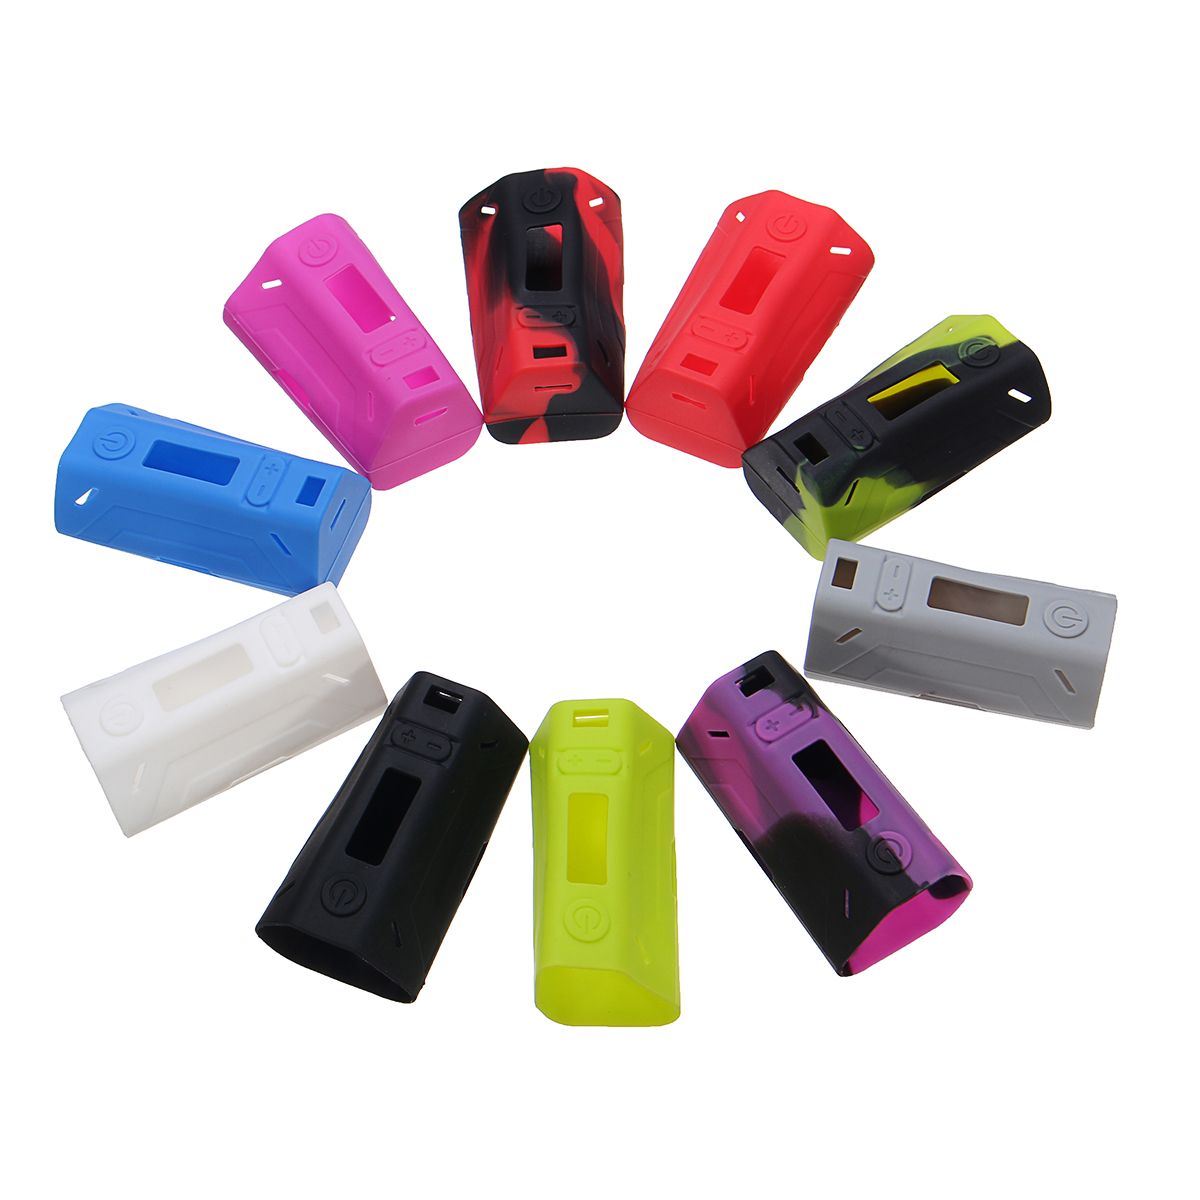 200W-Silicone-Protector-Cover-Case-Sleeve-Holder-Pouch-For-Cloupor-Smoant-Battlestar-TC-Mod-1312447